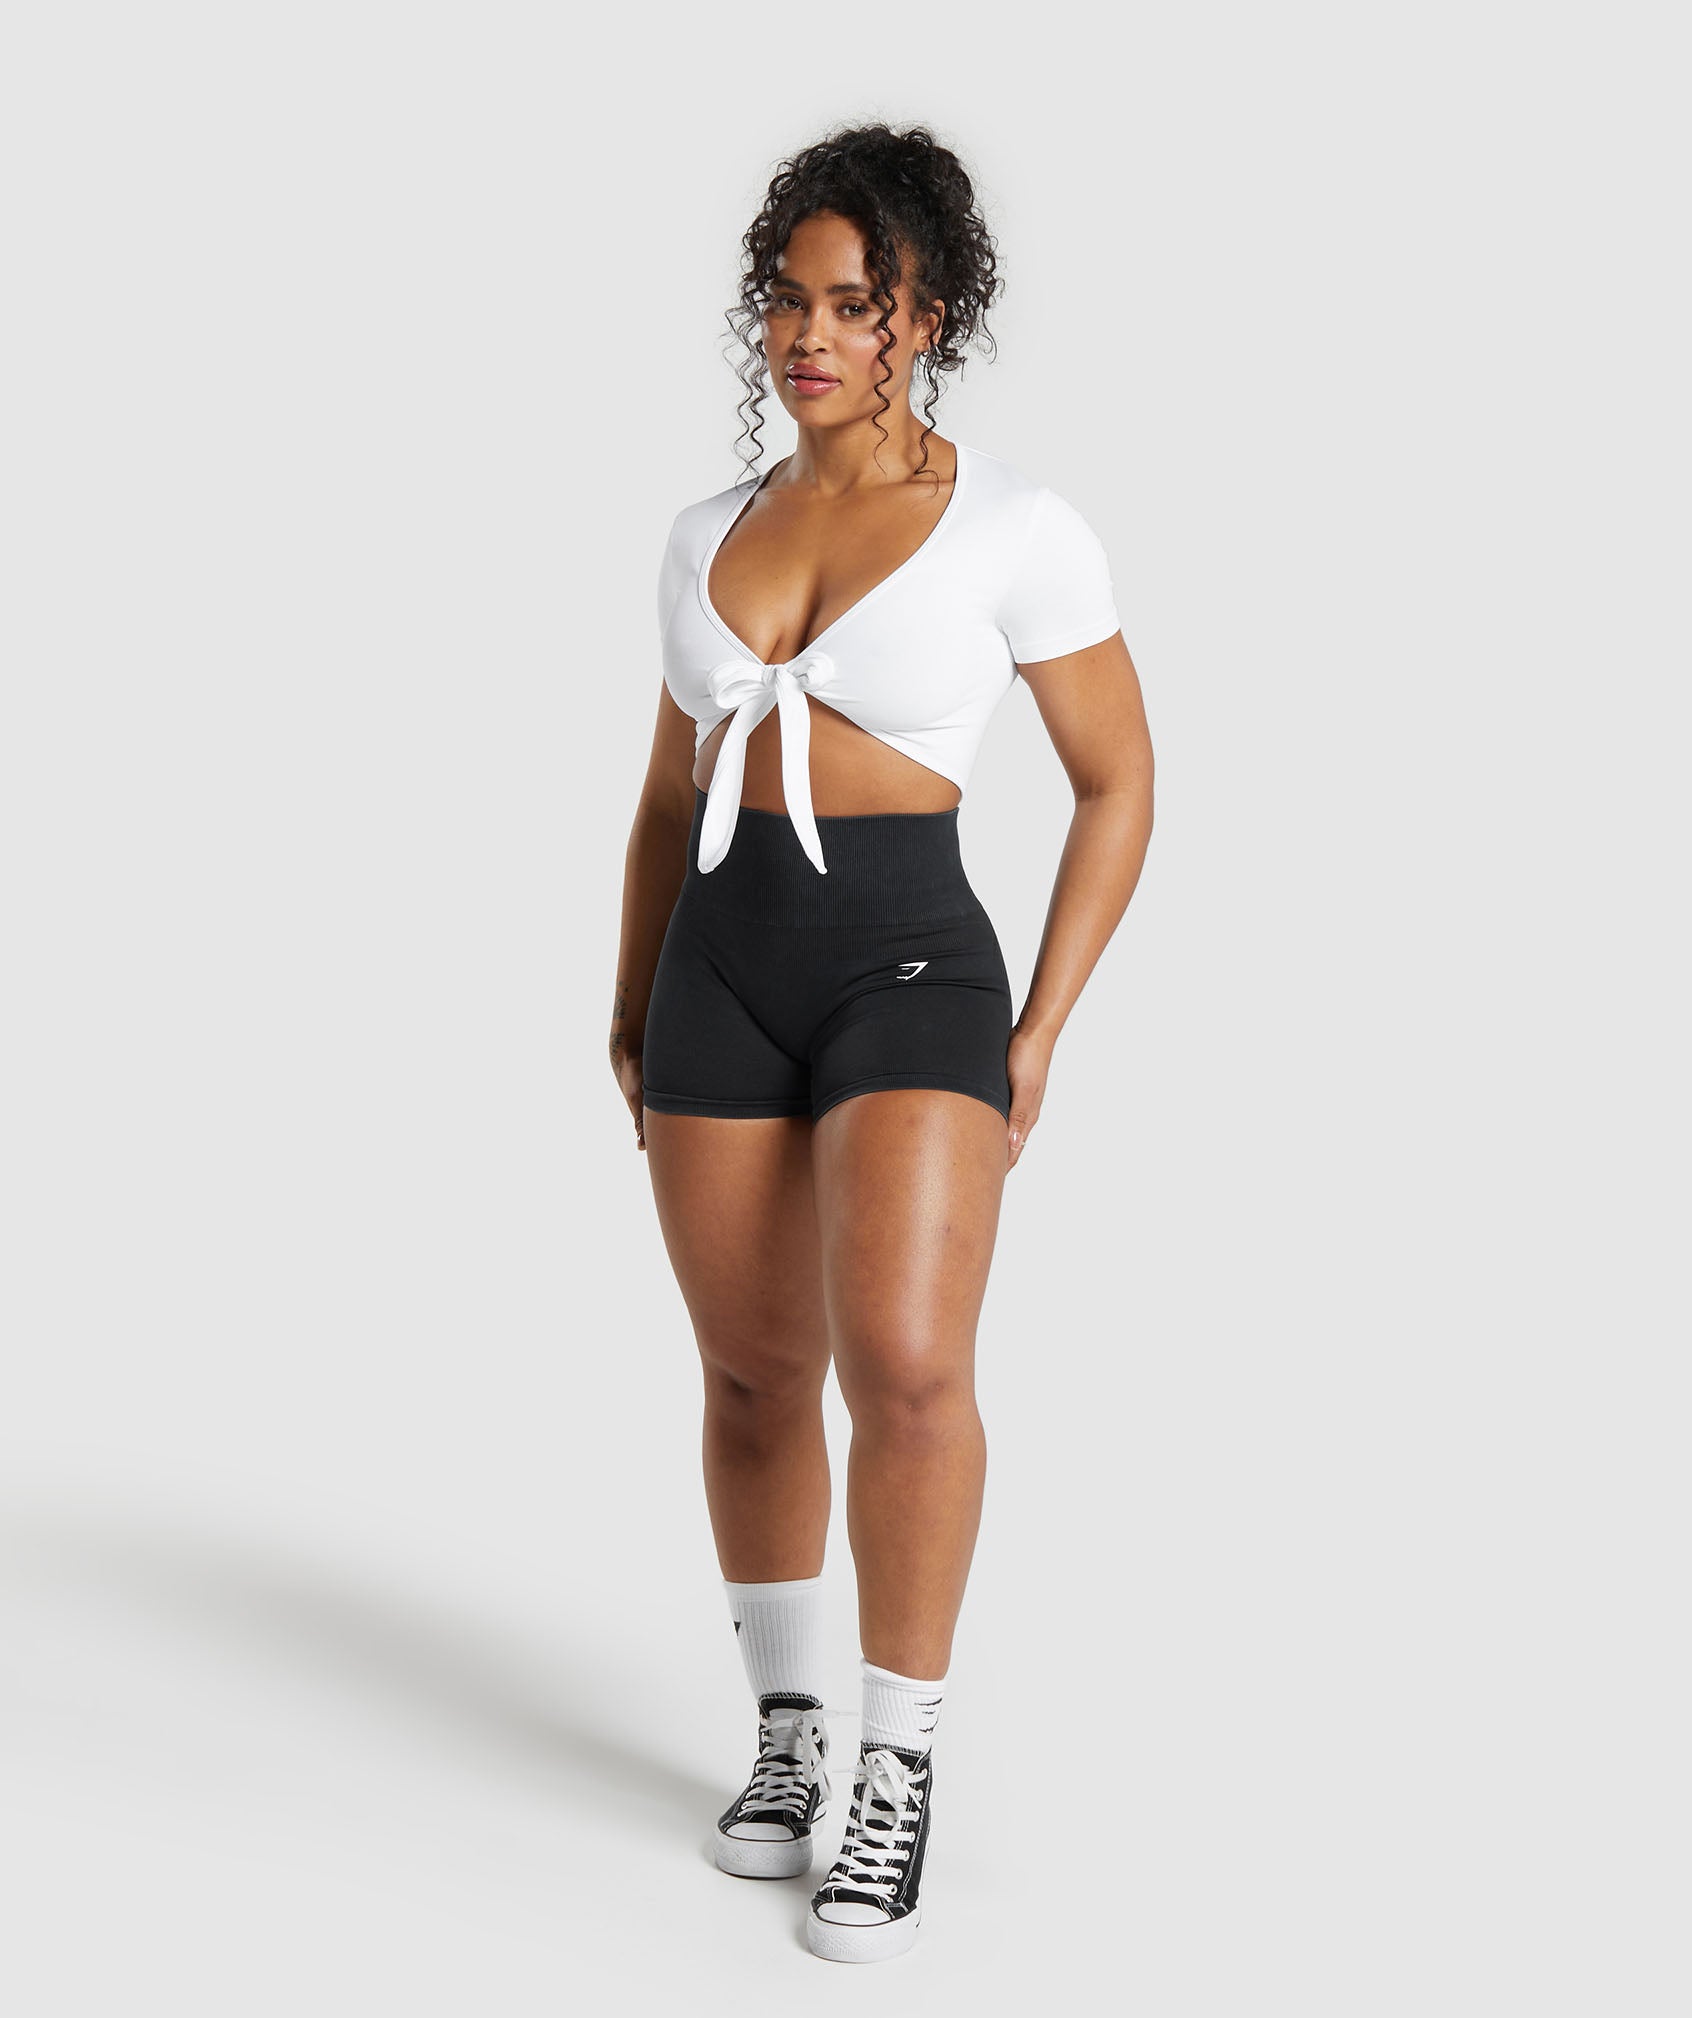 Gains Seamless Fitted Crop Top in White - view 4